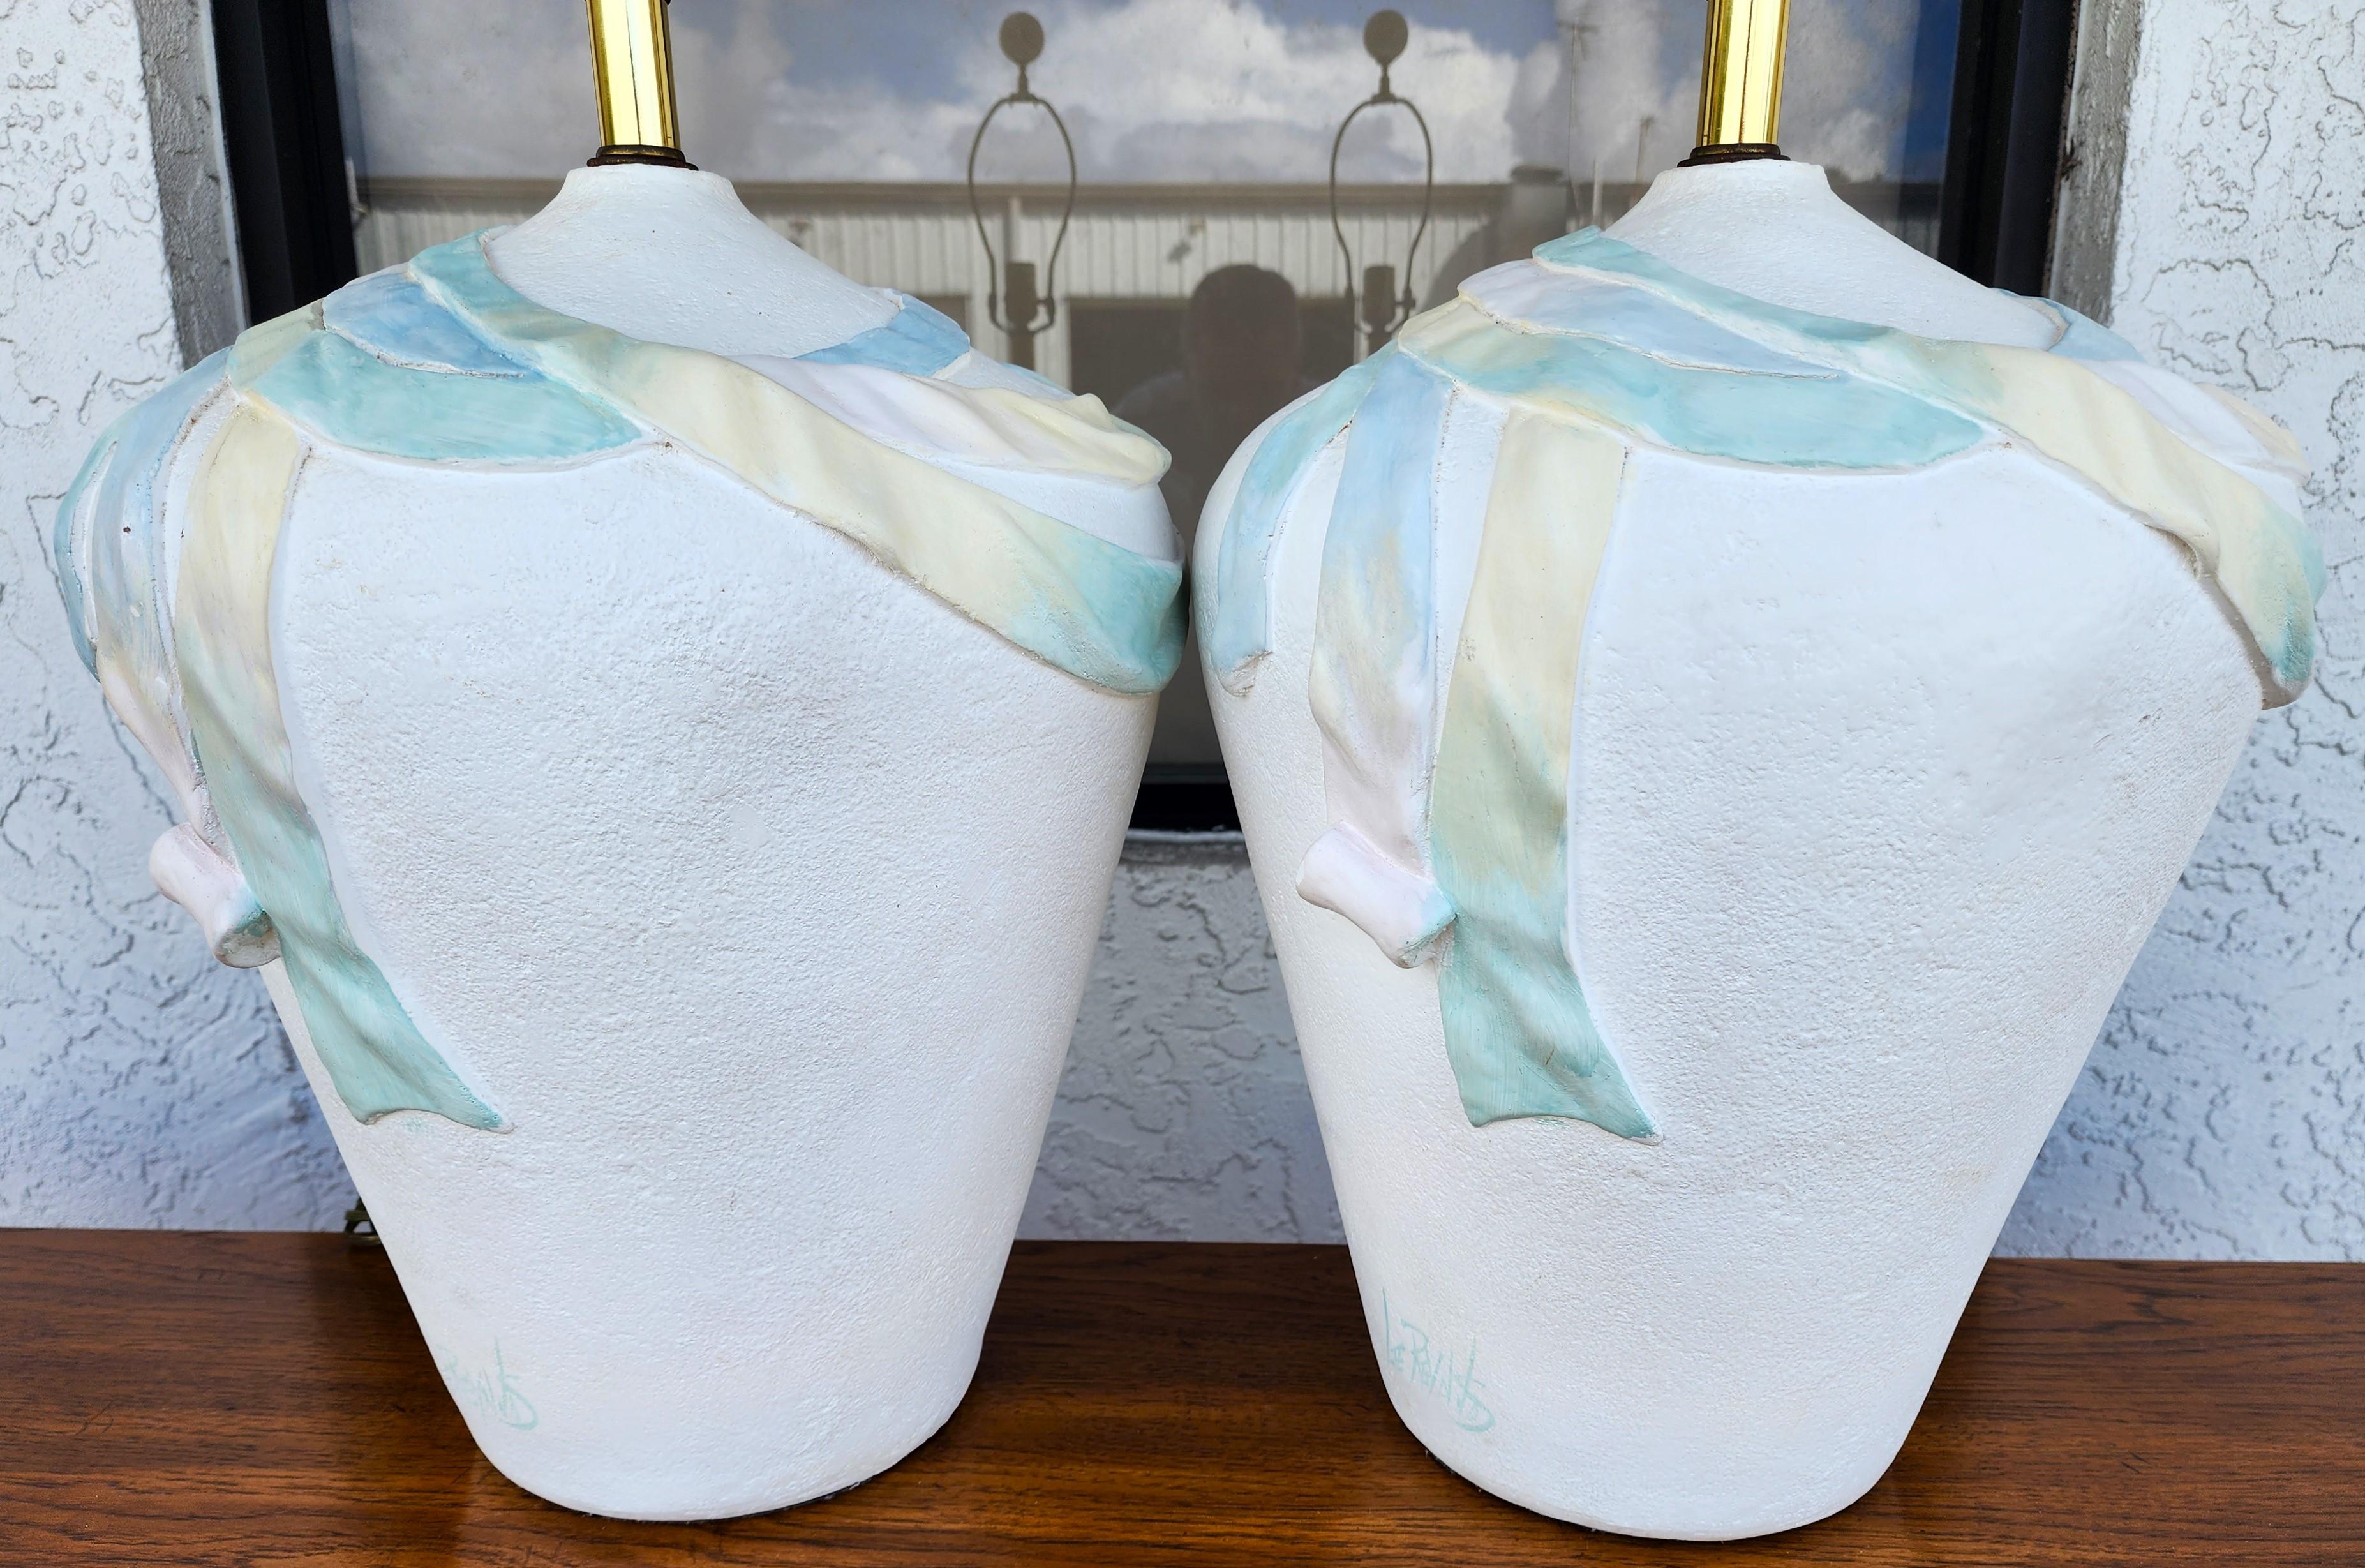 For FULL item description click on CONTINUE READING at the bottom of this page.

Offering One Of Our Recent Palm Beach Estate Fine Lighting Acquisitions Of A
Pair of 1970's Southwestern Style Table Lamps Signed LEE REYNOLDS 

We have many other